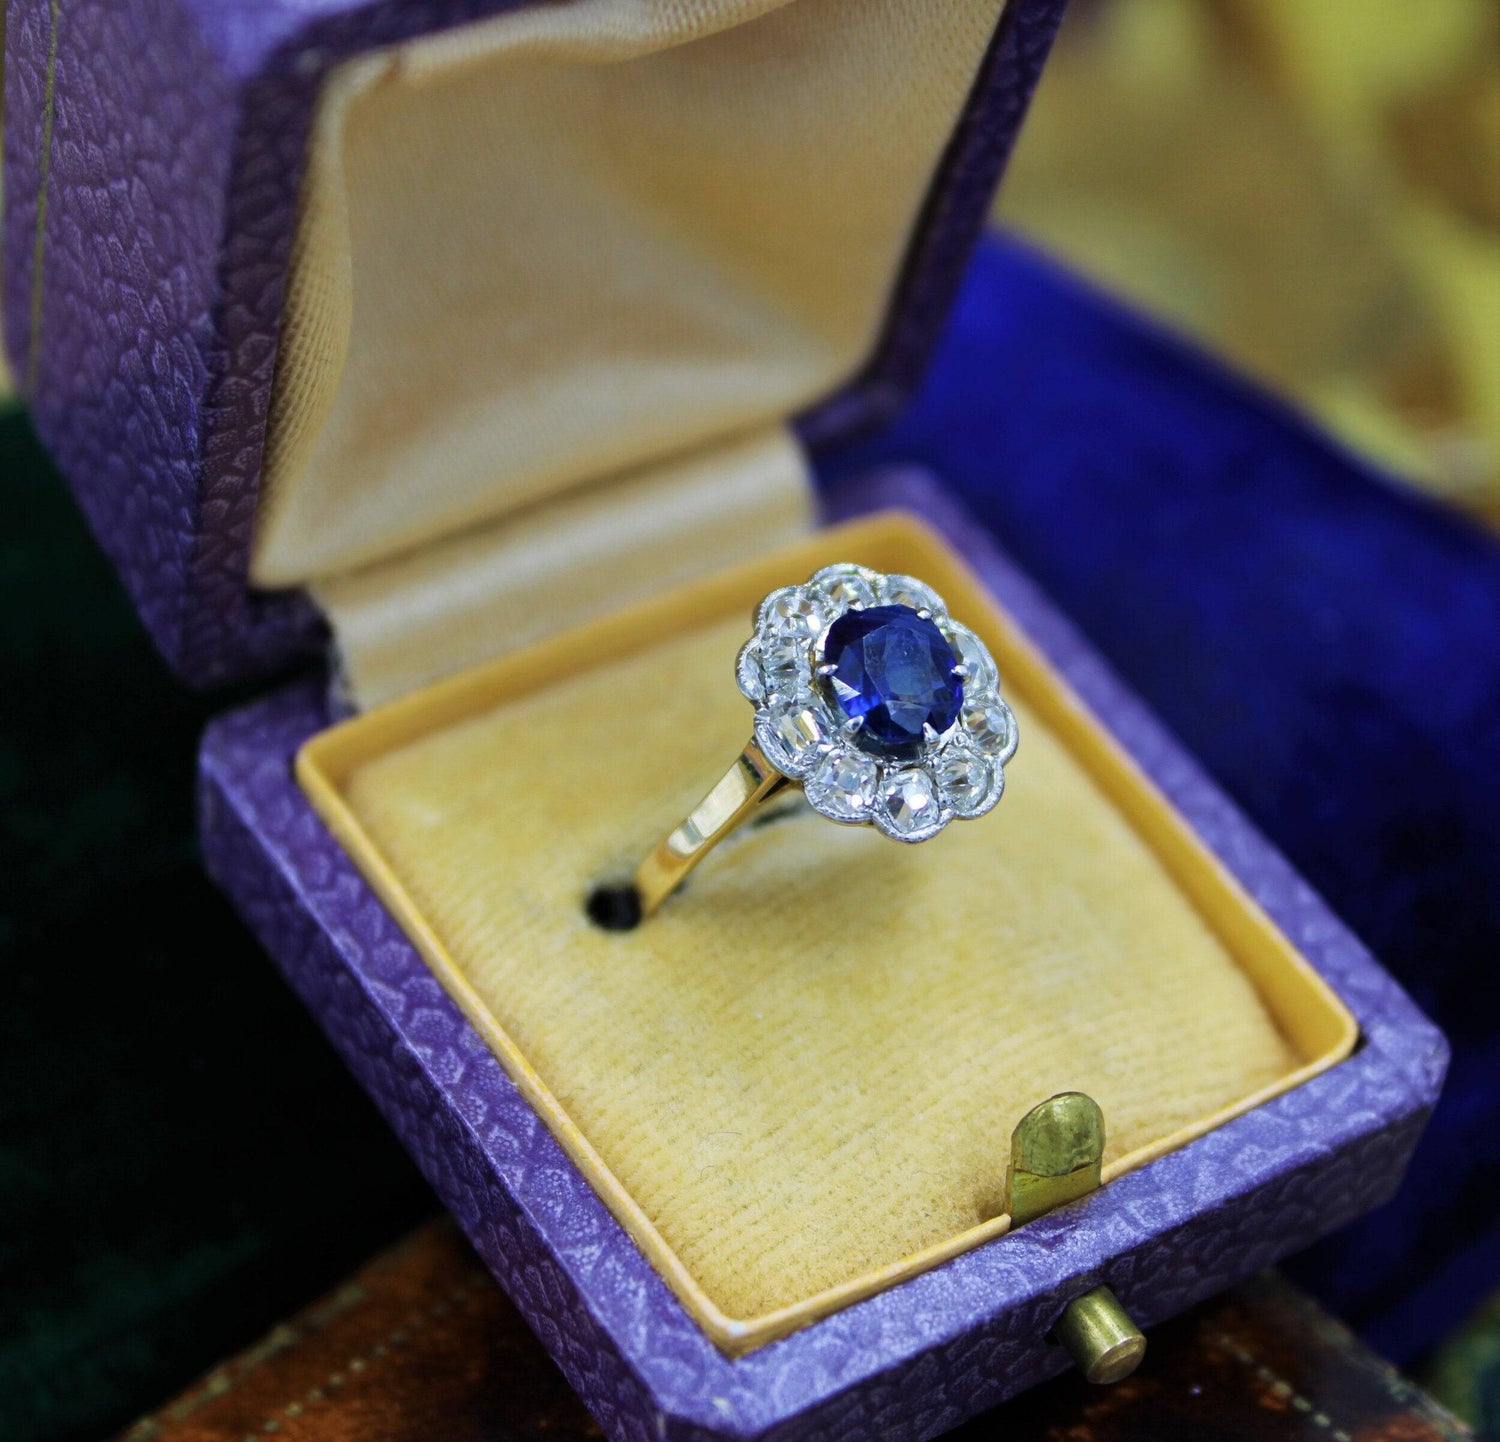 A very fine Sapphire and Diamond Cluster Ring set in 18ct Yellow Gold & Platinum, Circa 1935 - Robin Haydock Antiques